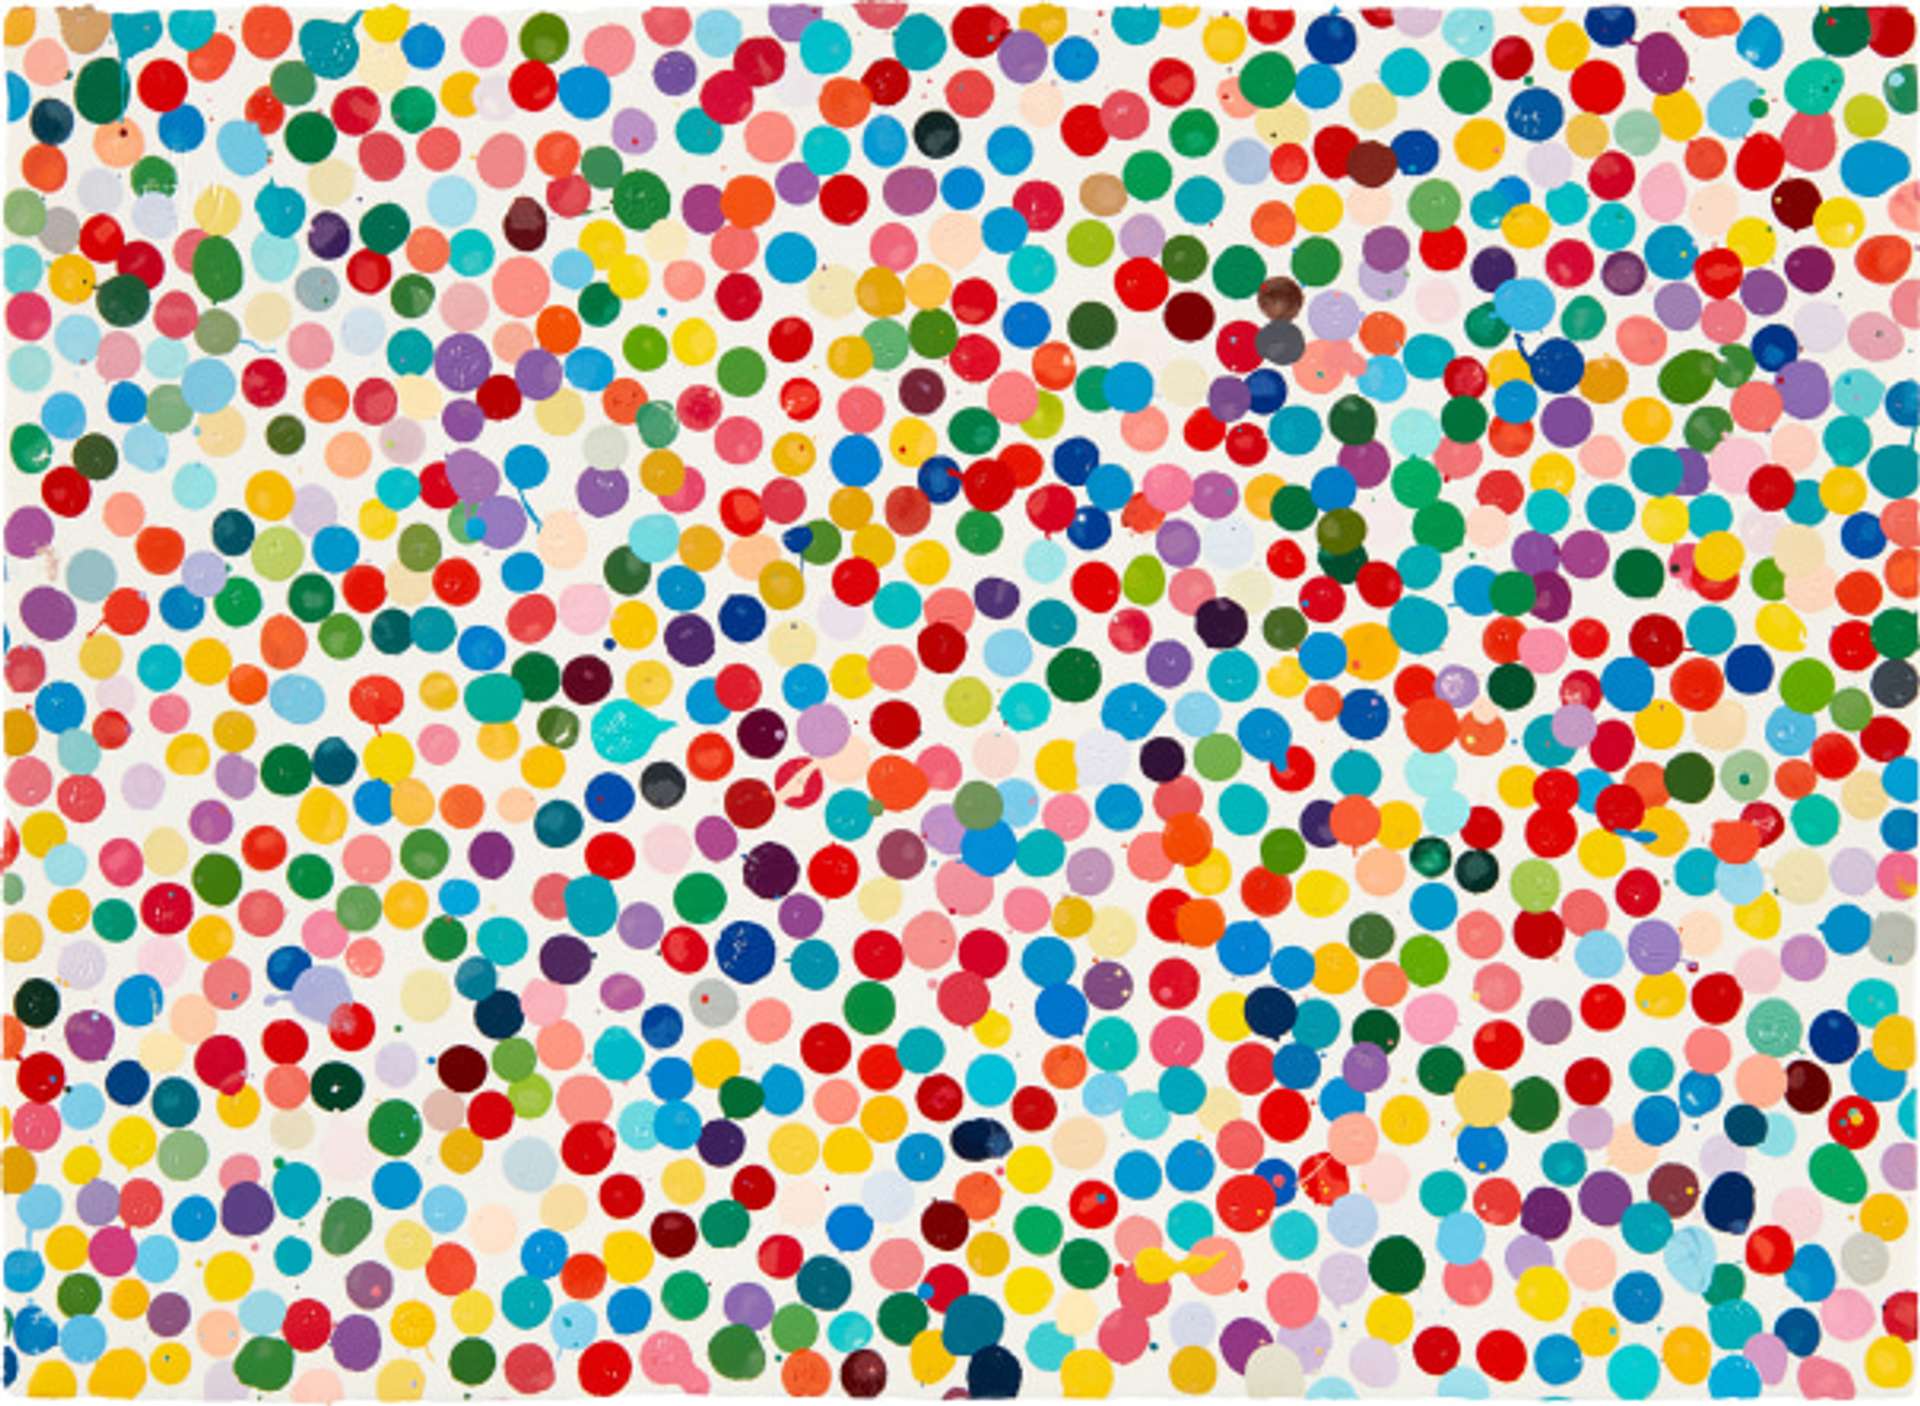 The Currency by Damien Hirst - MyArtBroker